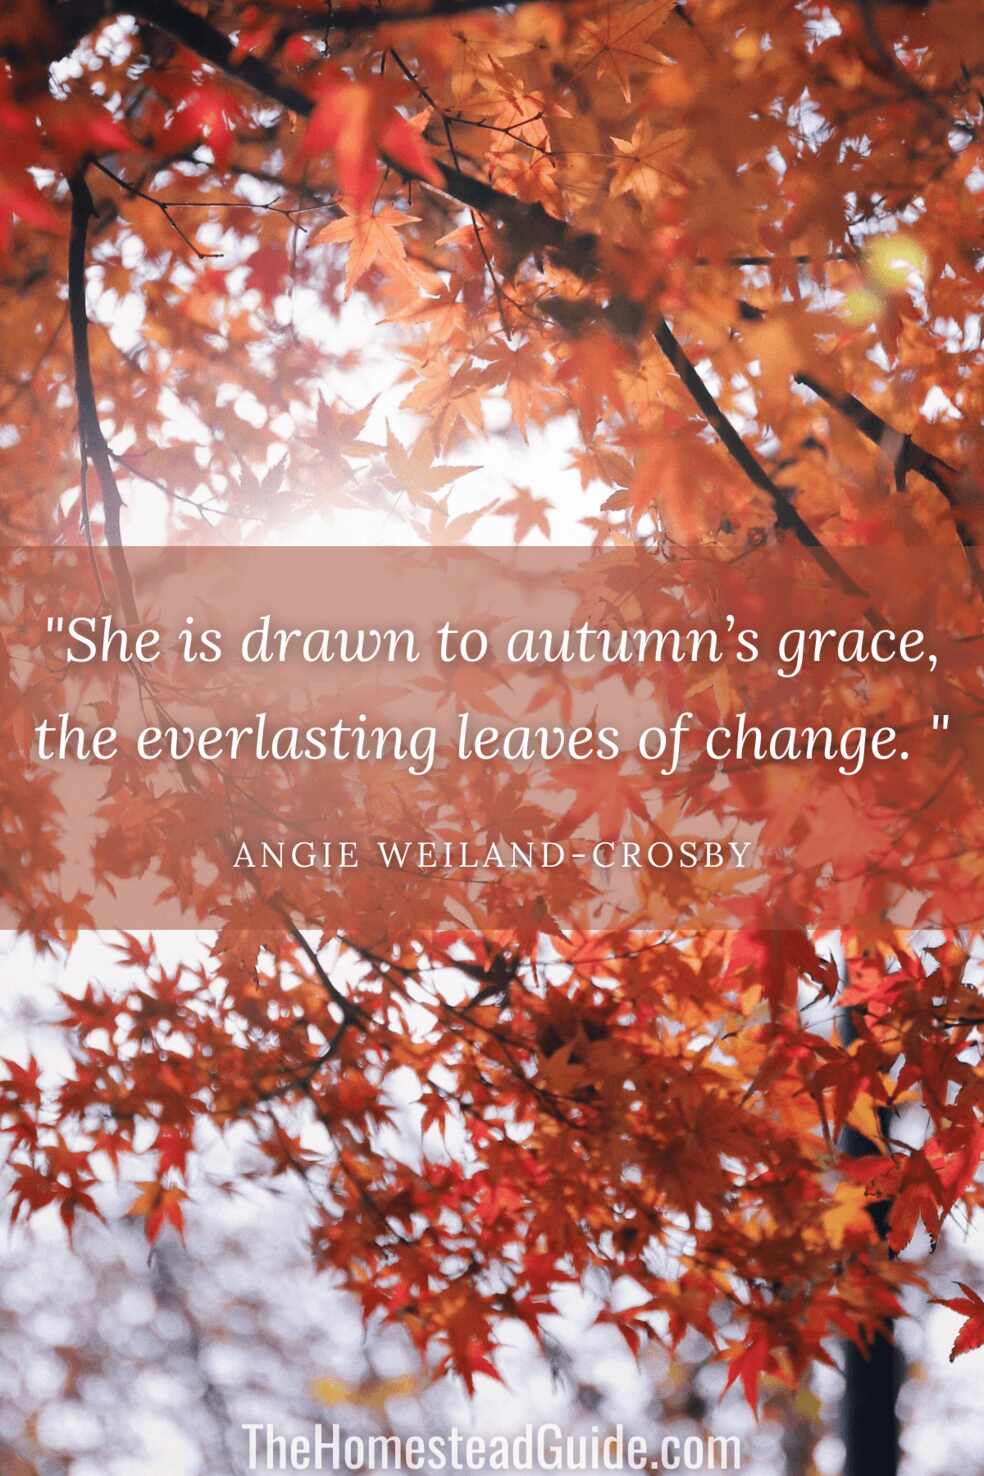 She is drawn to autumns grace, the everlasting leaves of change. 